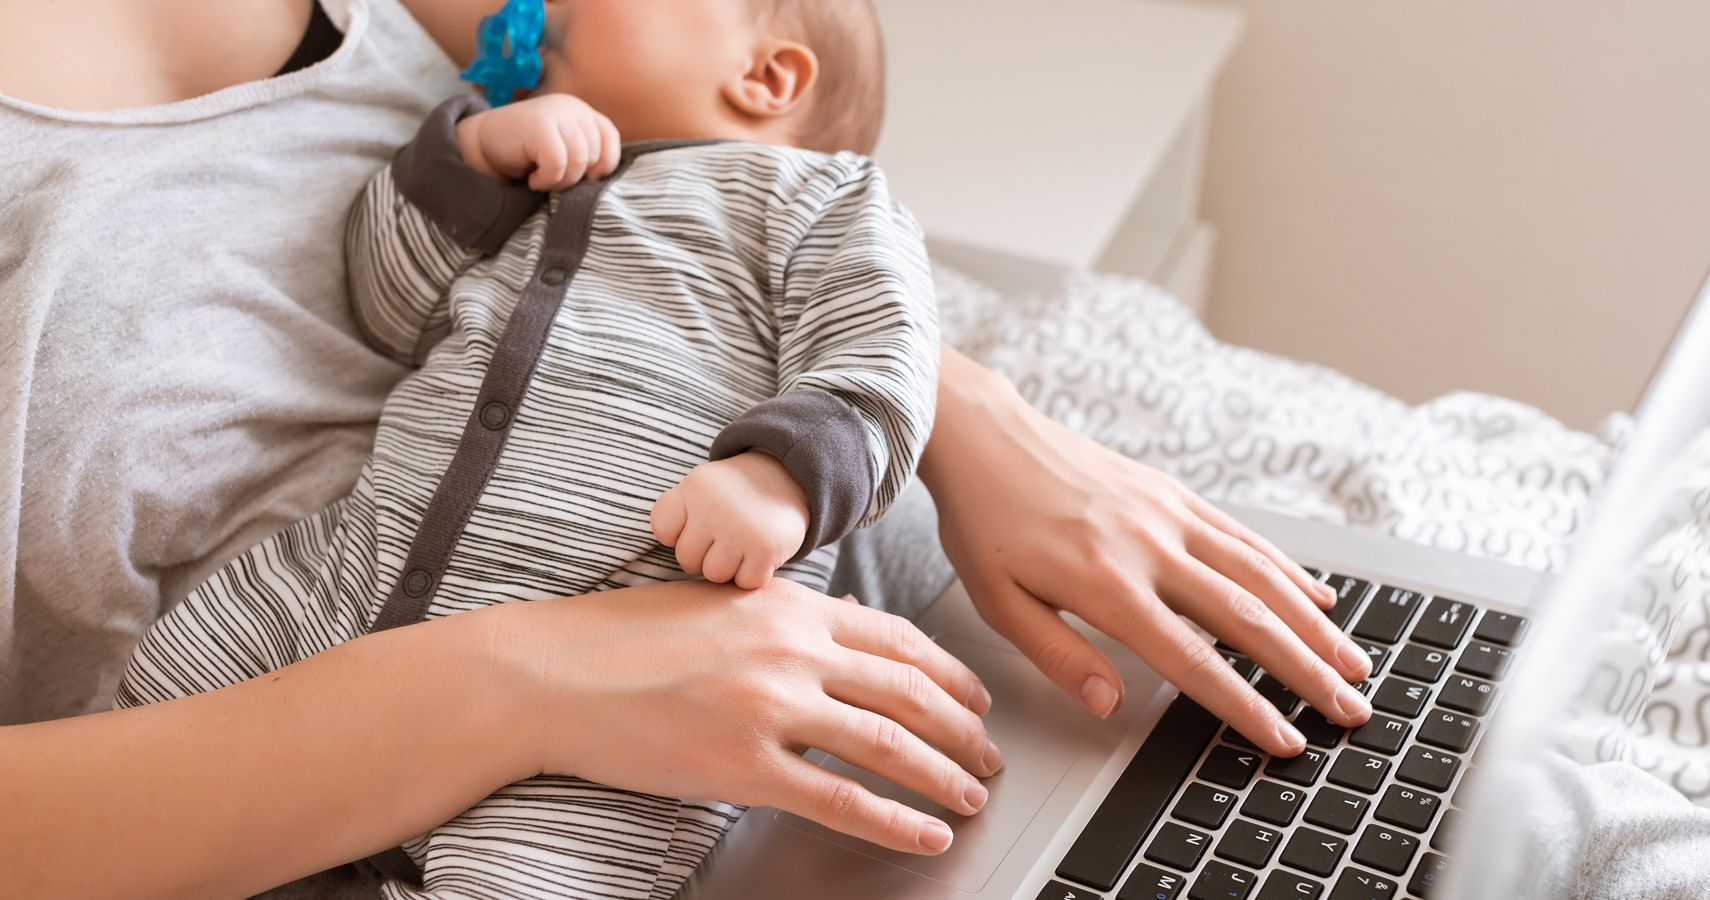 What To Do When You’re Working From Home & Your Kid’s Sick